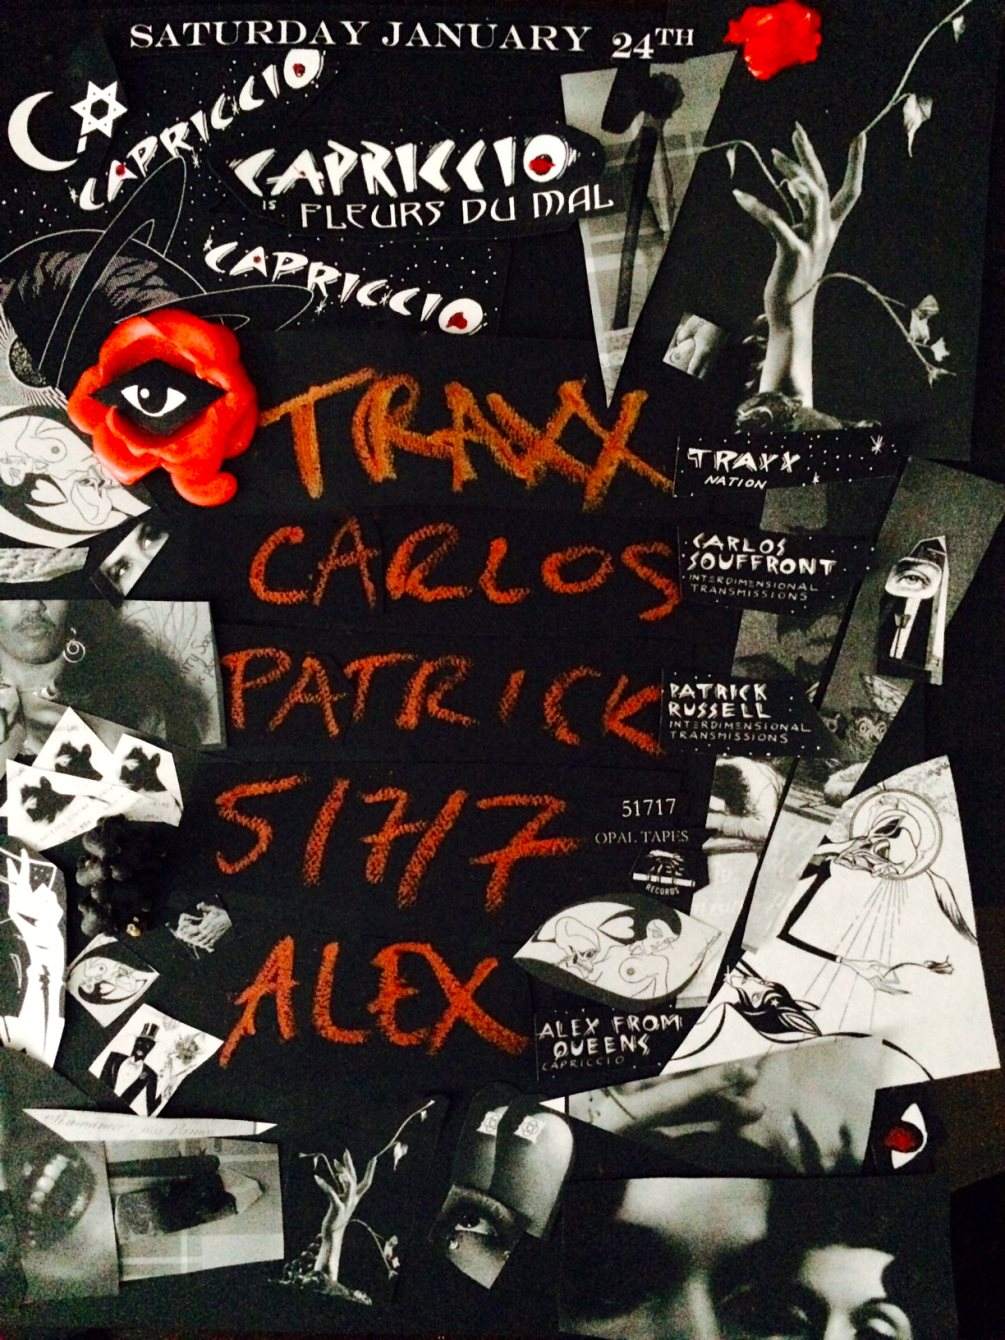 Capriccio with Traxx, Carlos Souffront, Patrick Russell, 51717 Live, Alex From Queens - Página frontal